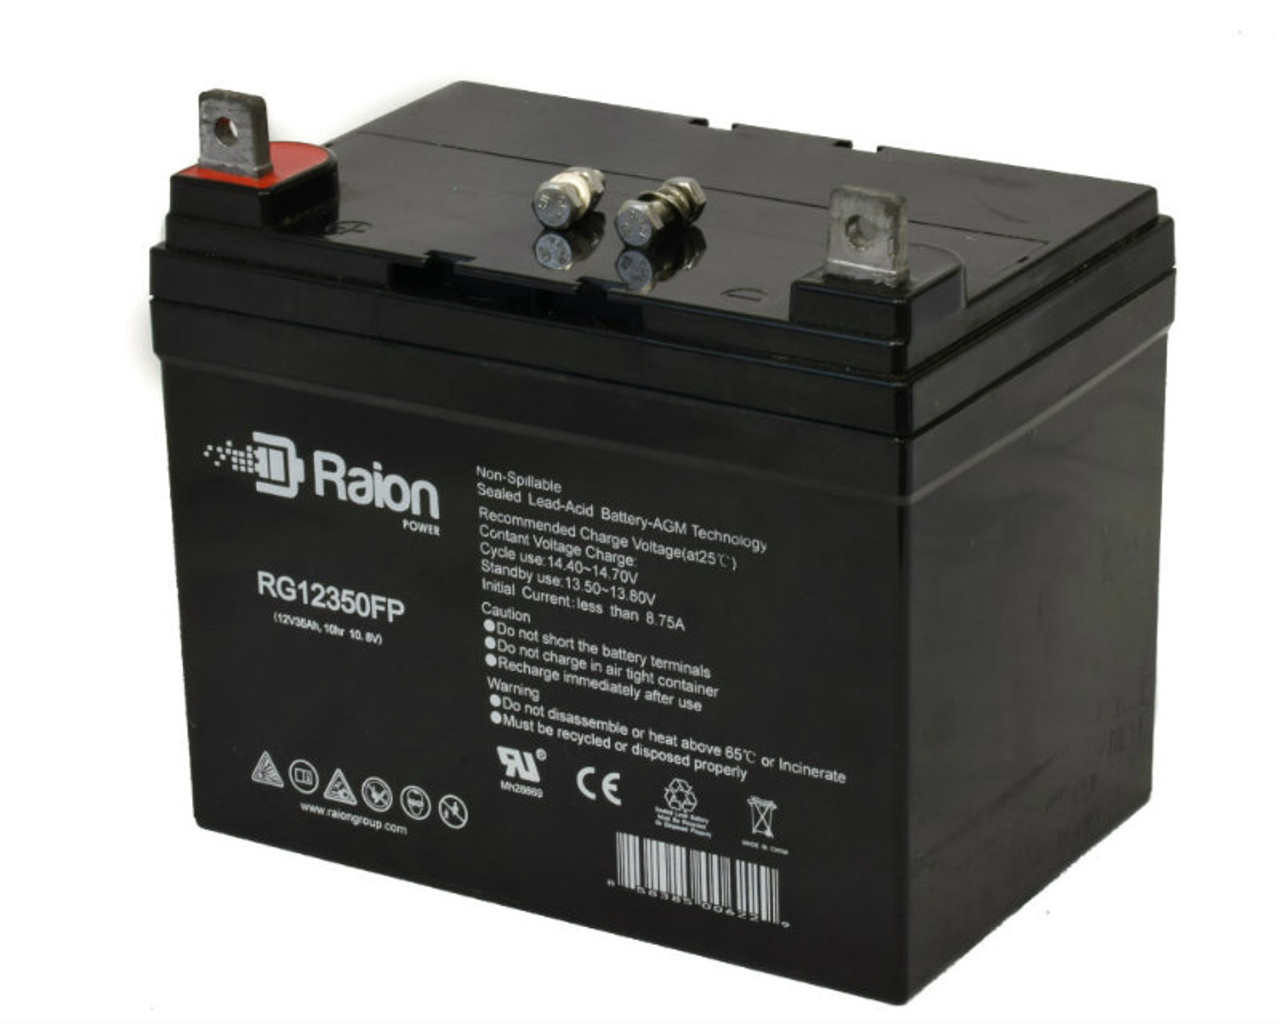 Raion Power Replacement 12V 35Ah RG12350FP Mobility Scooter Battery for Invacare R32